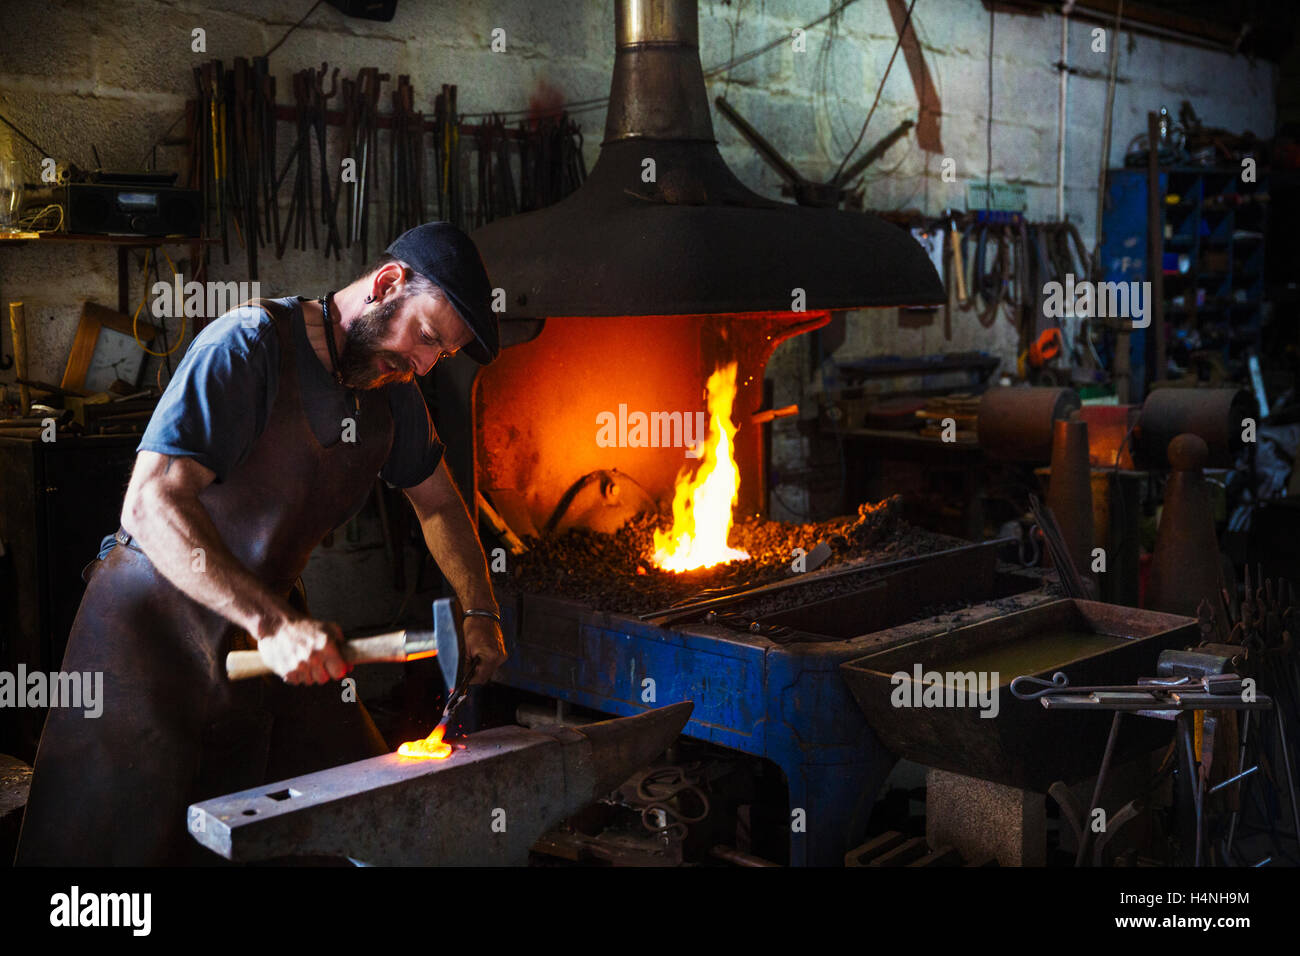 A blacksmith strikes a piece of red hot metal on anvil with a hammer in a workshop. Stock Photo